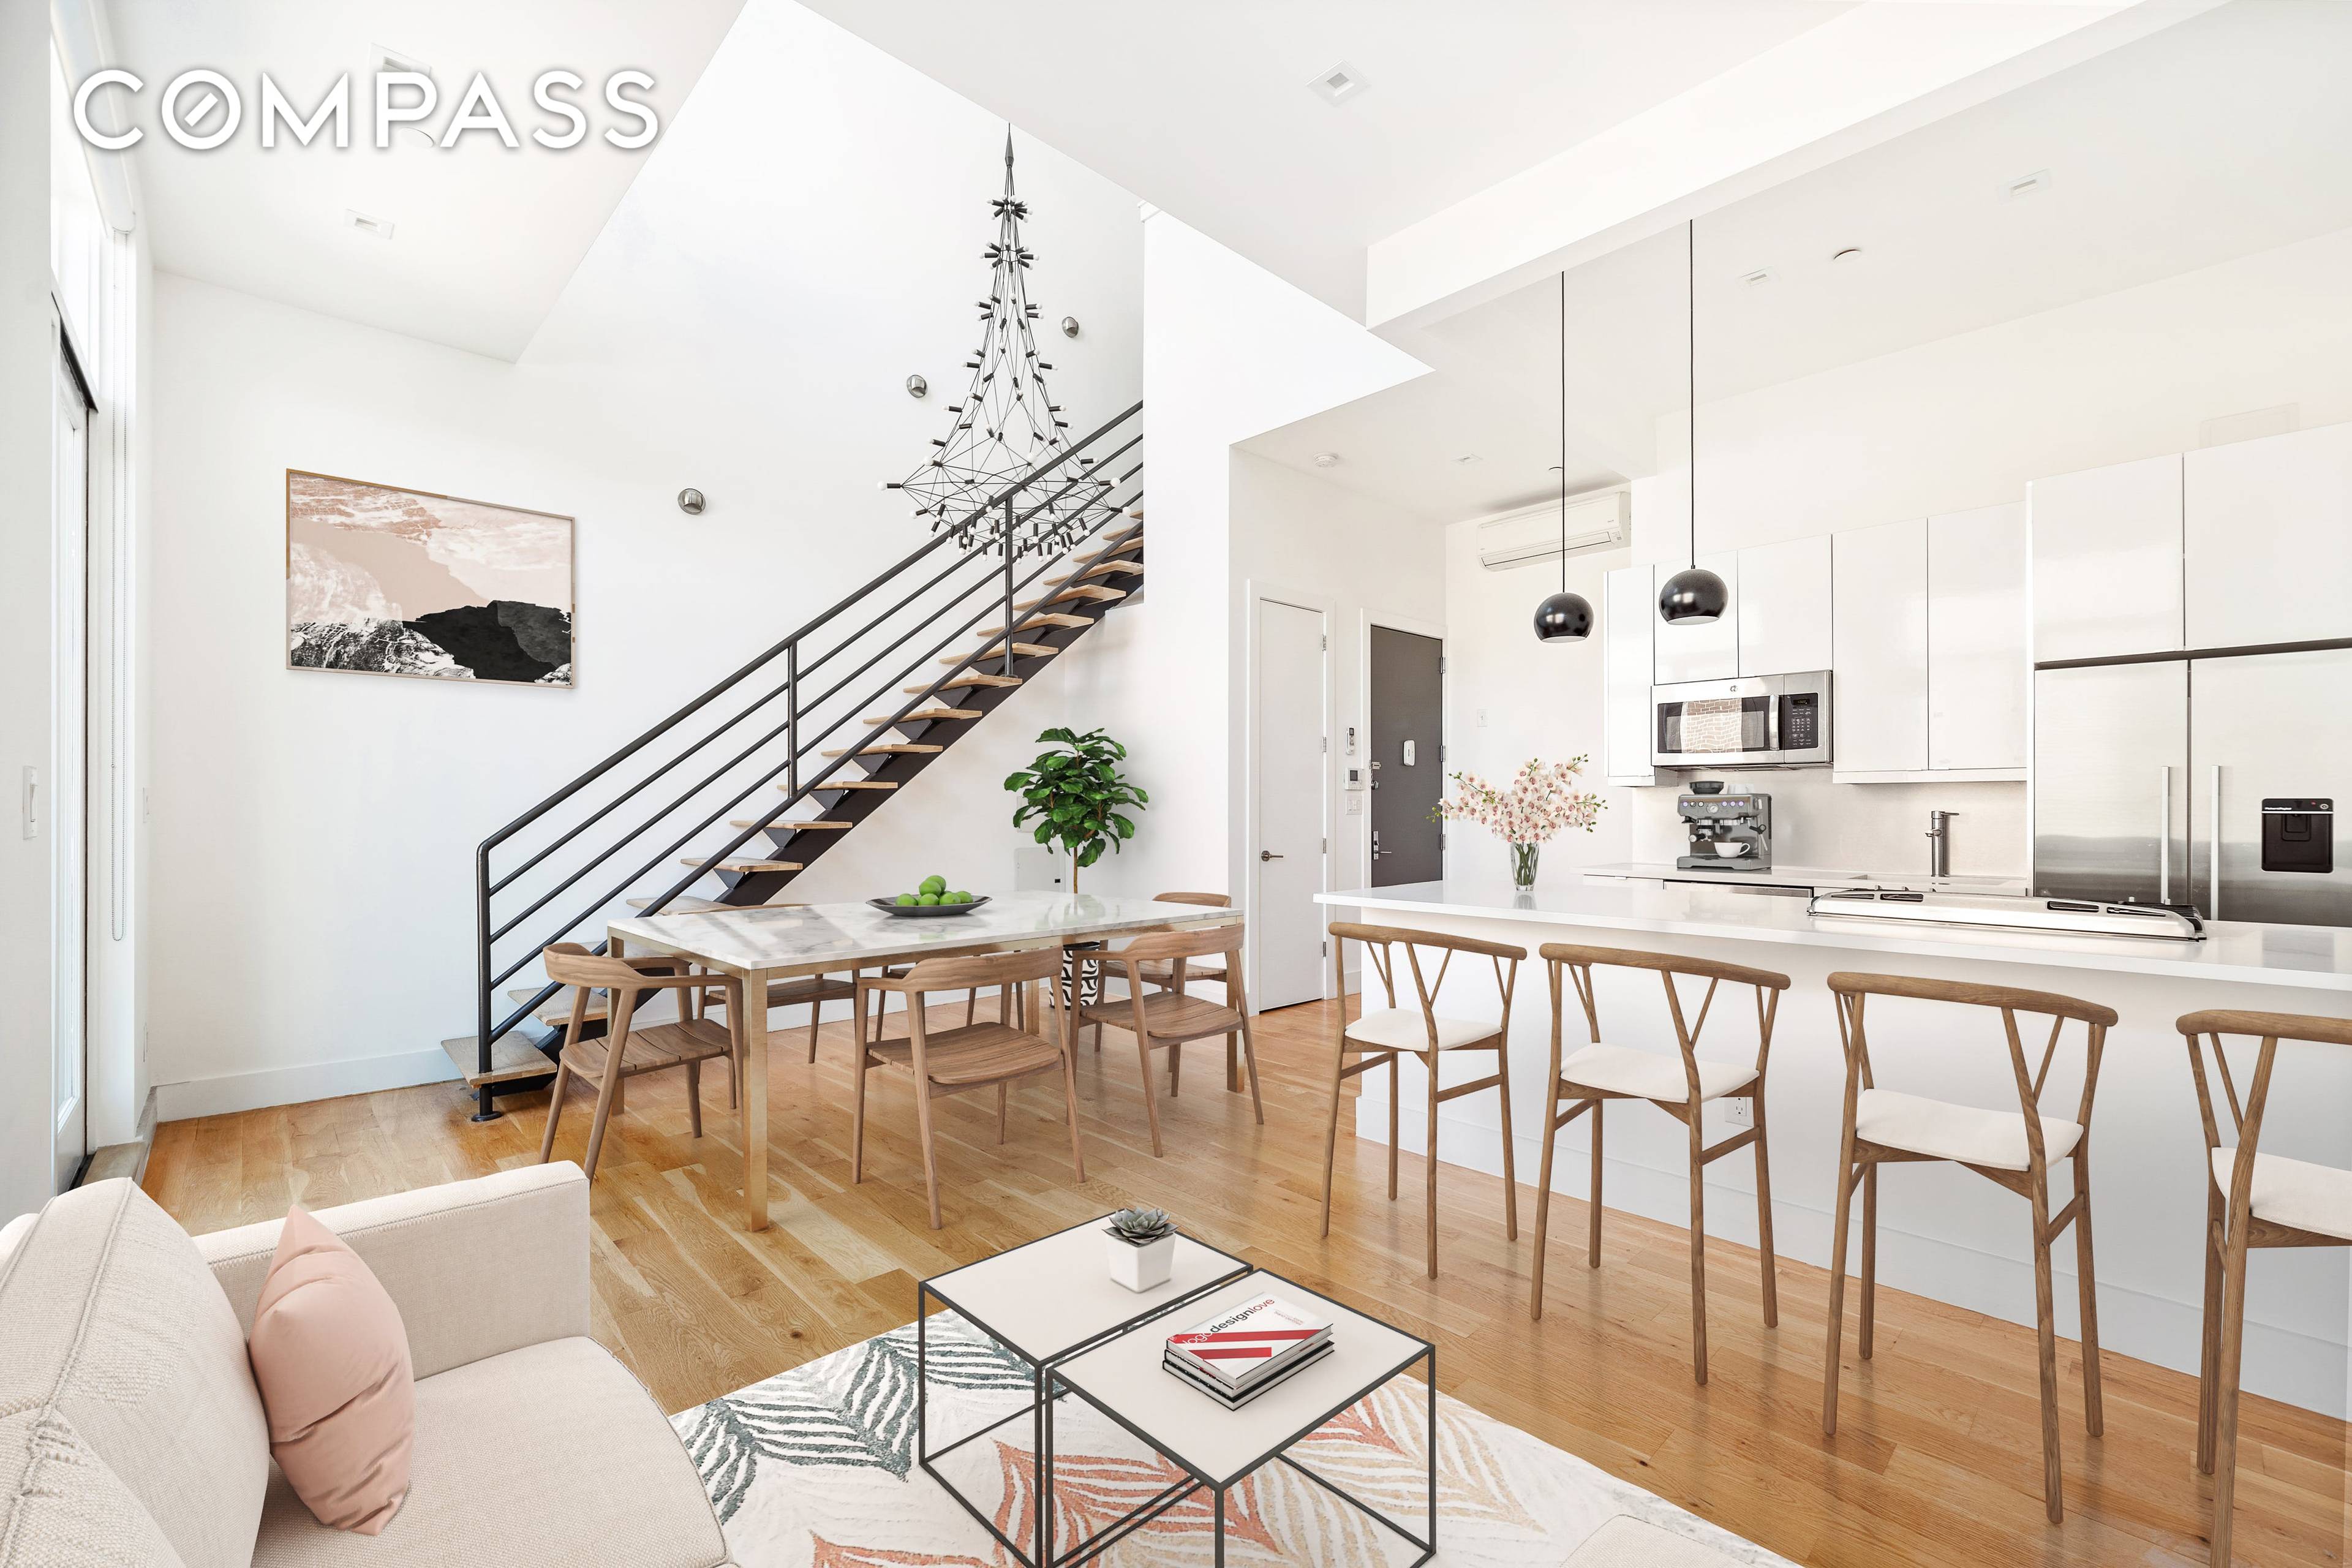 Enjoy extraordinary indoor outdoor living with sun splashed designer interiors and three separate outdoor spaces in this stunning three bedroom, two bathroom duplex condominium at the border of Prospect Heights ...